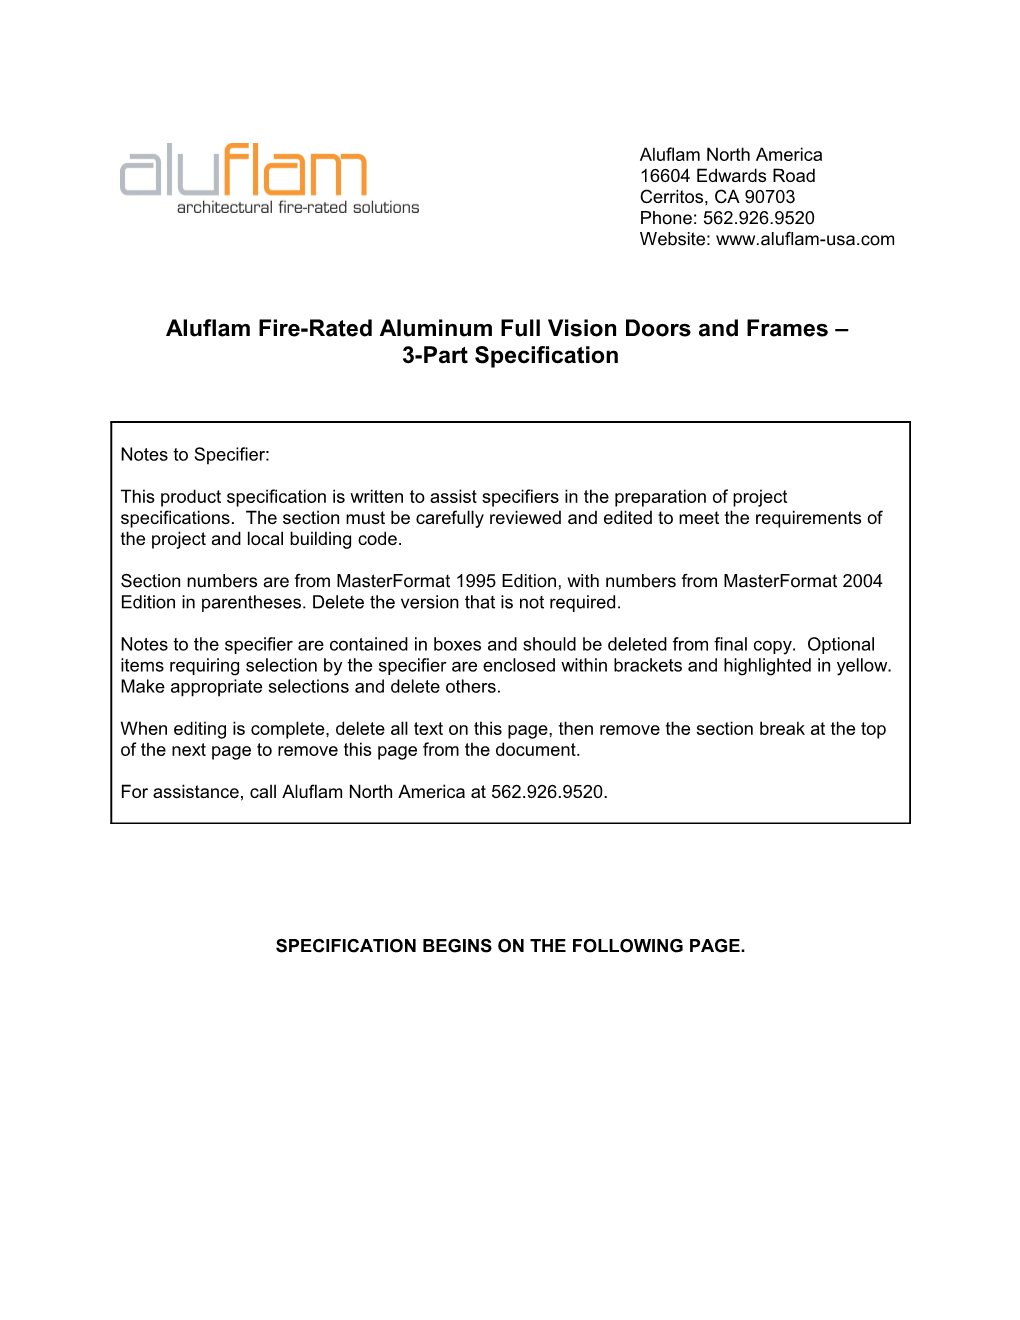 Aluflam Fire-Rated Aluminum Full Vision Doors and Frames